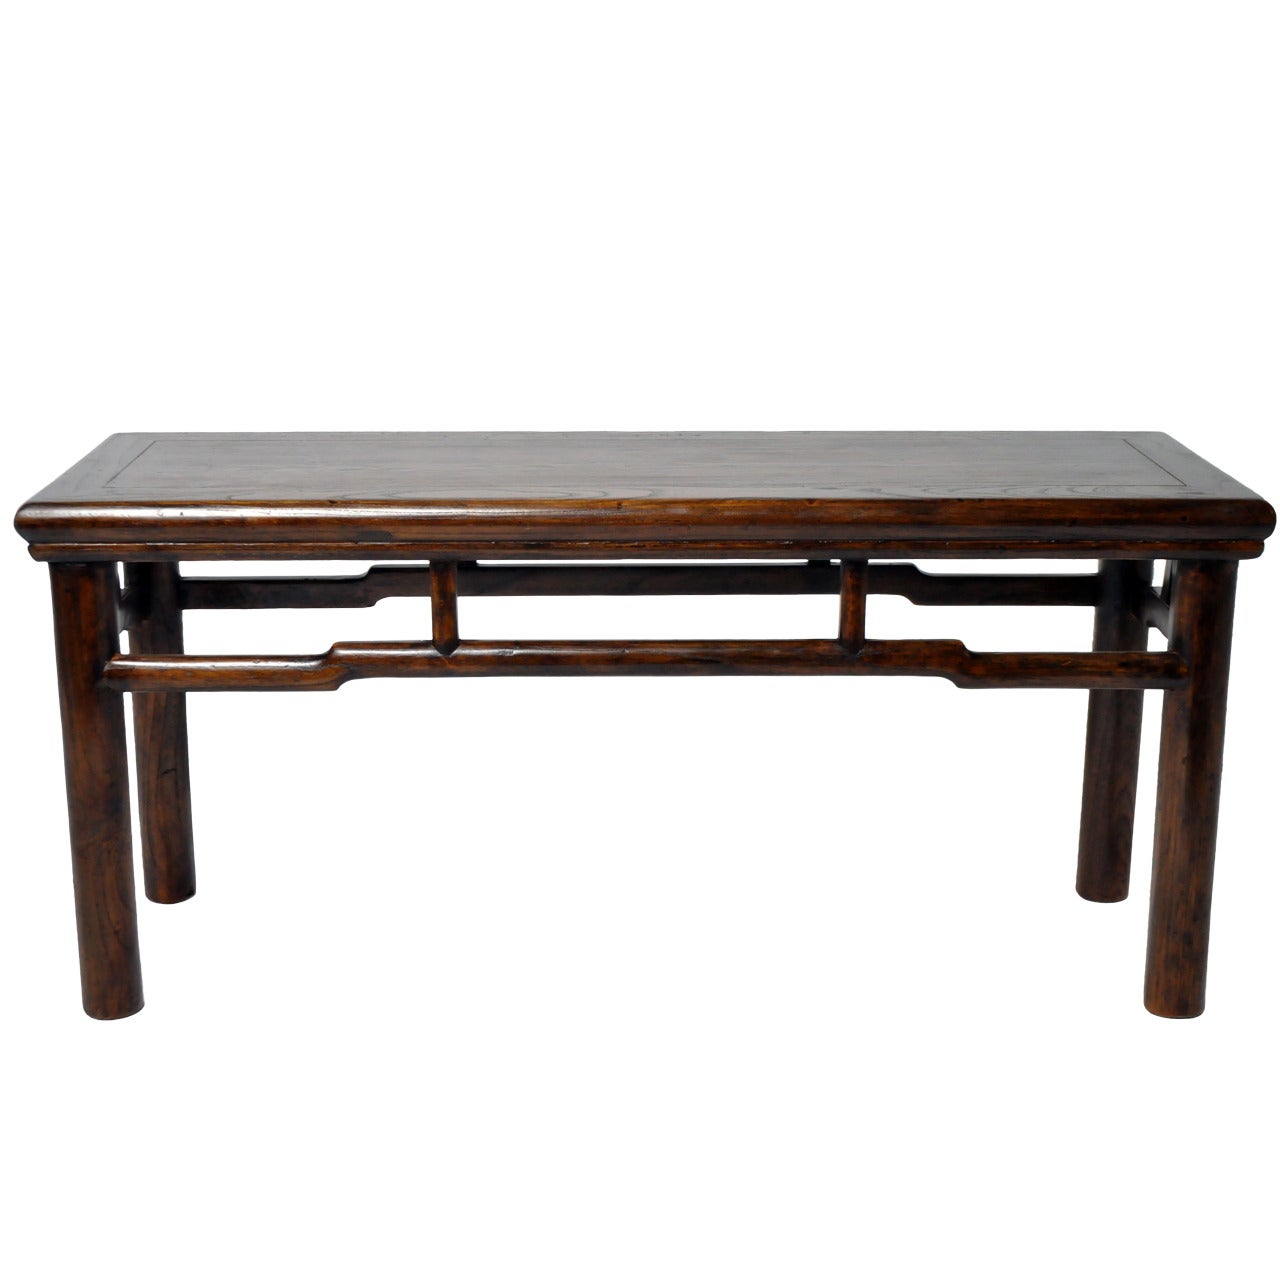 Chinese Bench with a Solid Wood Top and Round Posted Legs